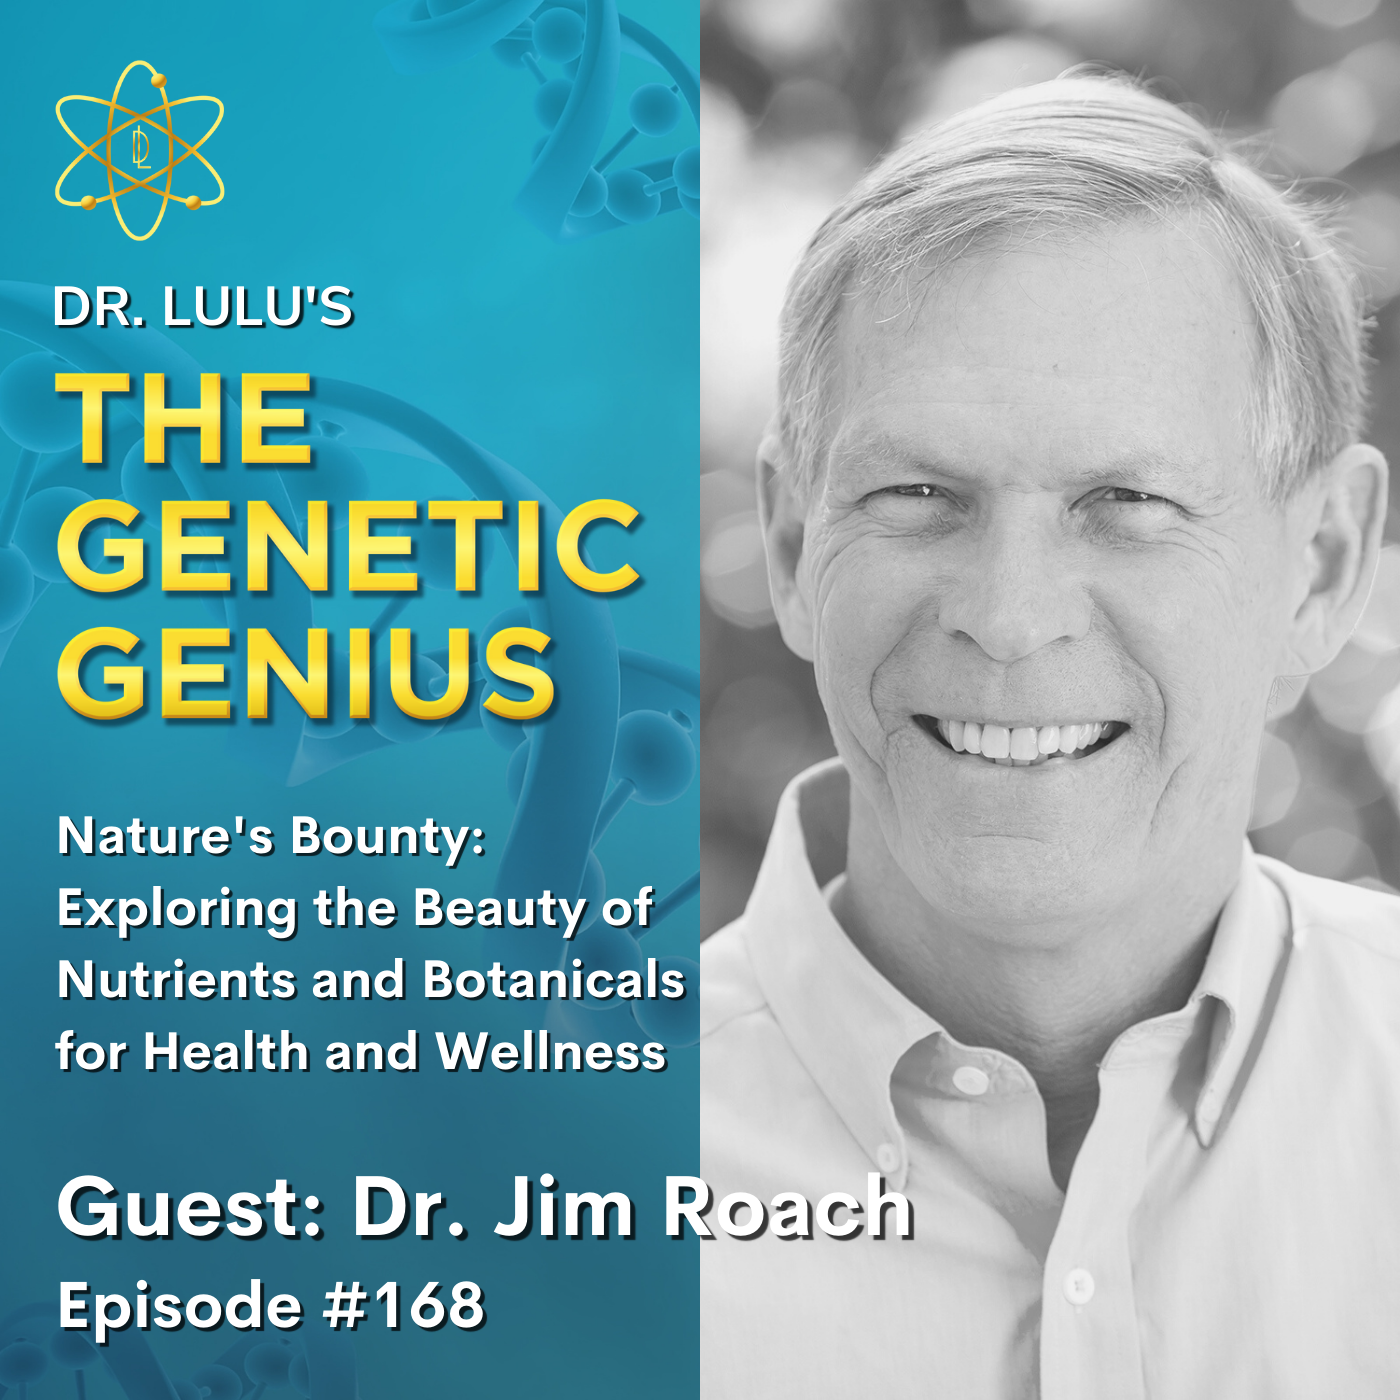 Nature's Bounty: Exploring The Beauty Of Nutrients And Botanicals For Health And Wellness